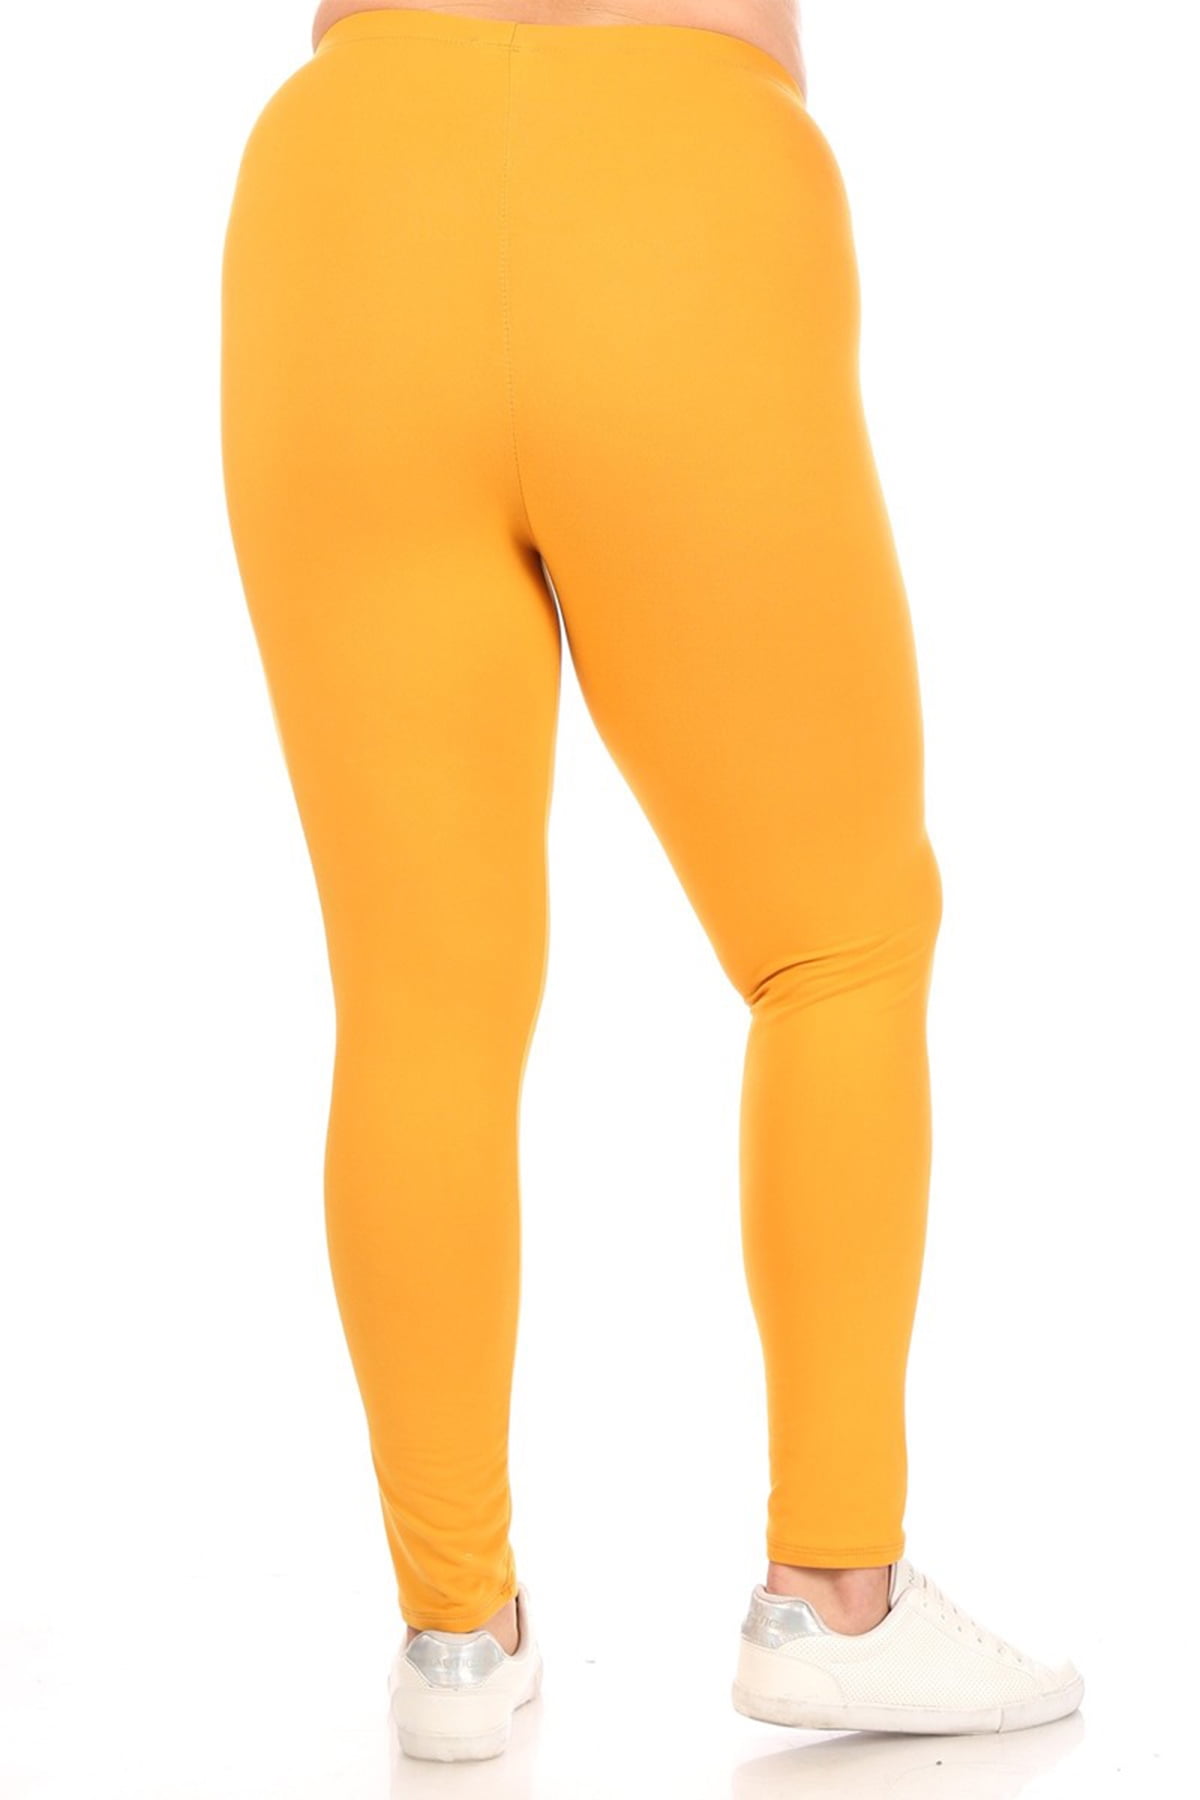 YYDGH Womens High Waisted Yoga Pants Bow-Knot Tie Workout Leggings Ruched  Butt Lifting Stretch Sport Running Tights Yellow L - Walmart.com